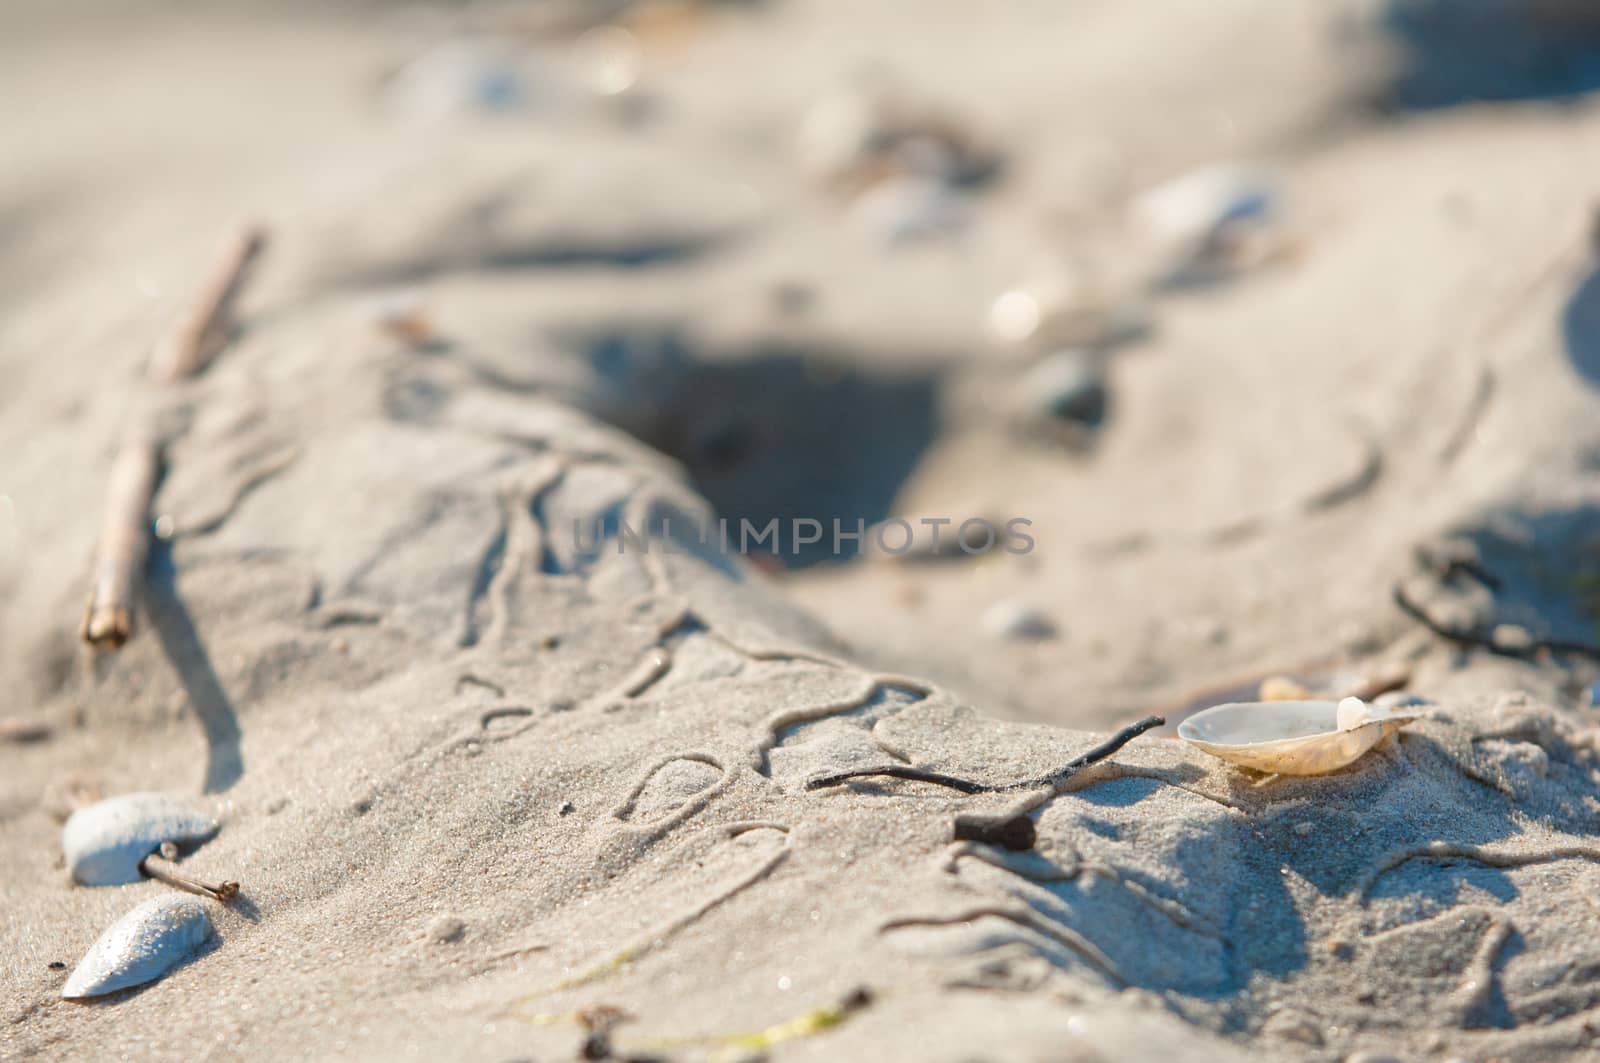 See shells and sand as background, summer beach by horizonphoto